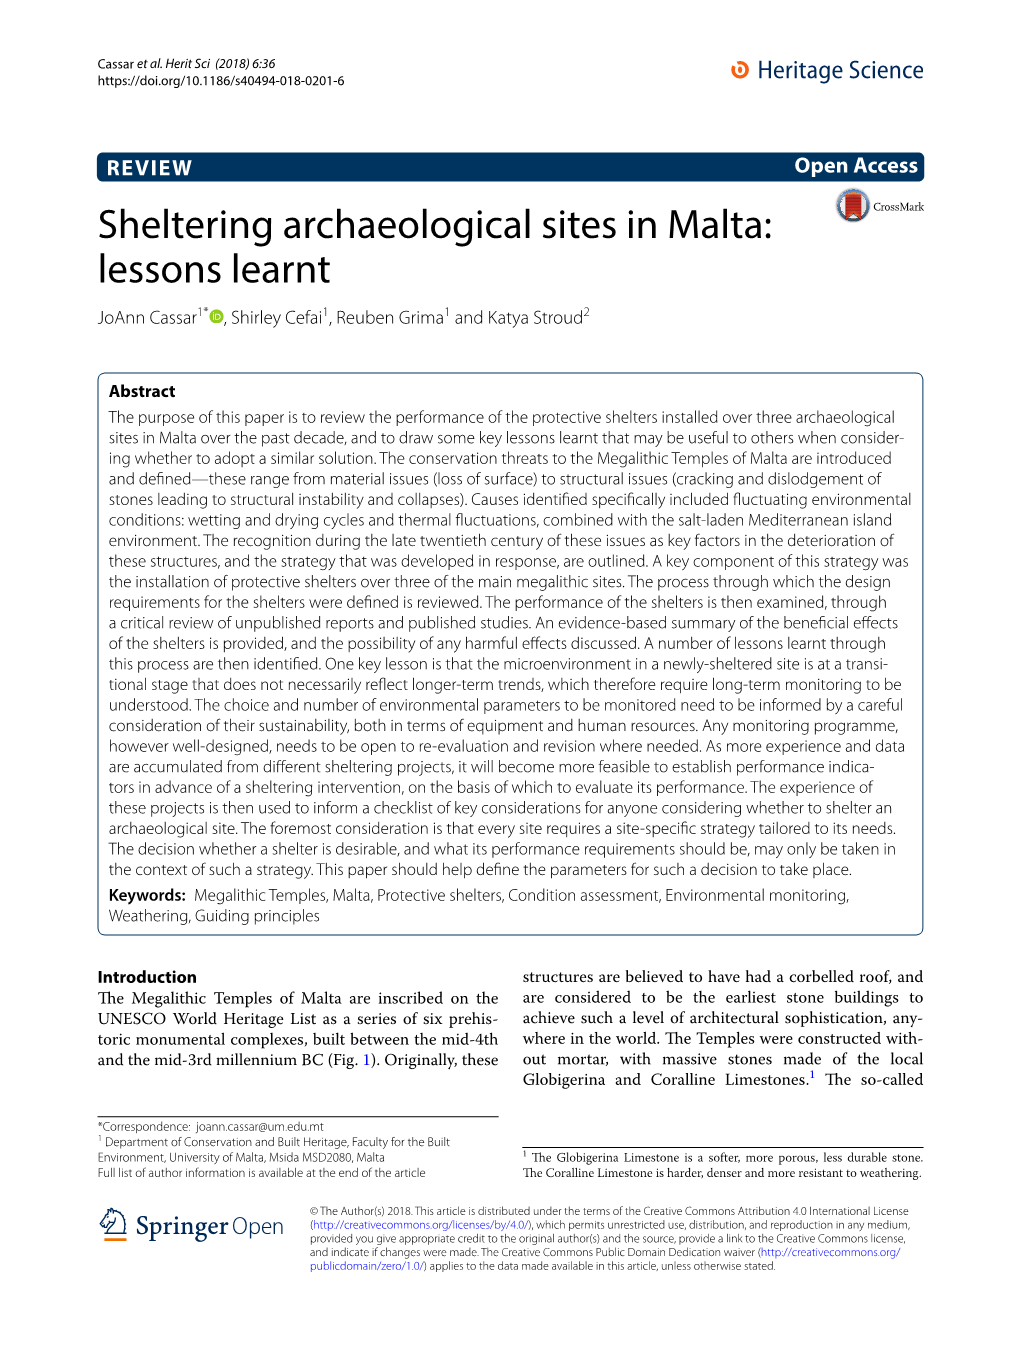 Sheltering Archaeological Sites in Malta: Lessons Learnt Joann Cassar1* , Shirley Cefai1, Reuben Grima1 and Katya Stroud2